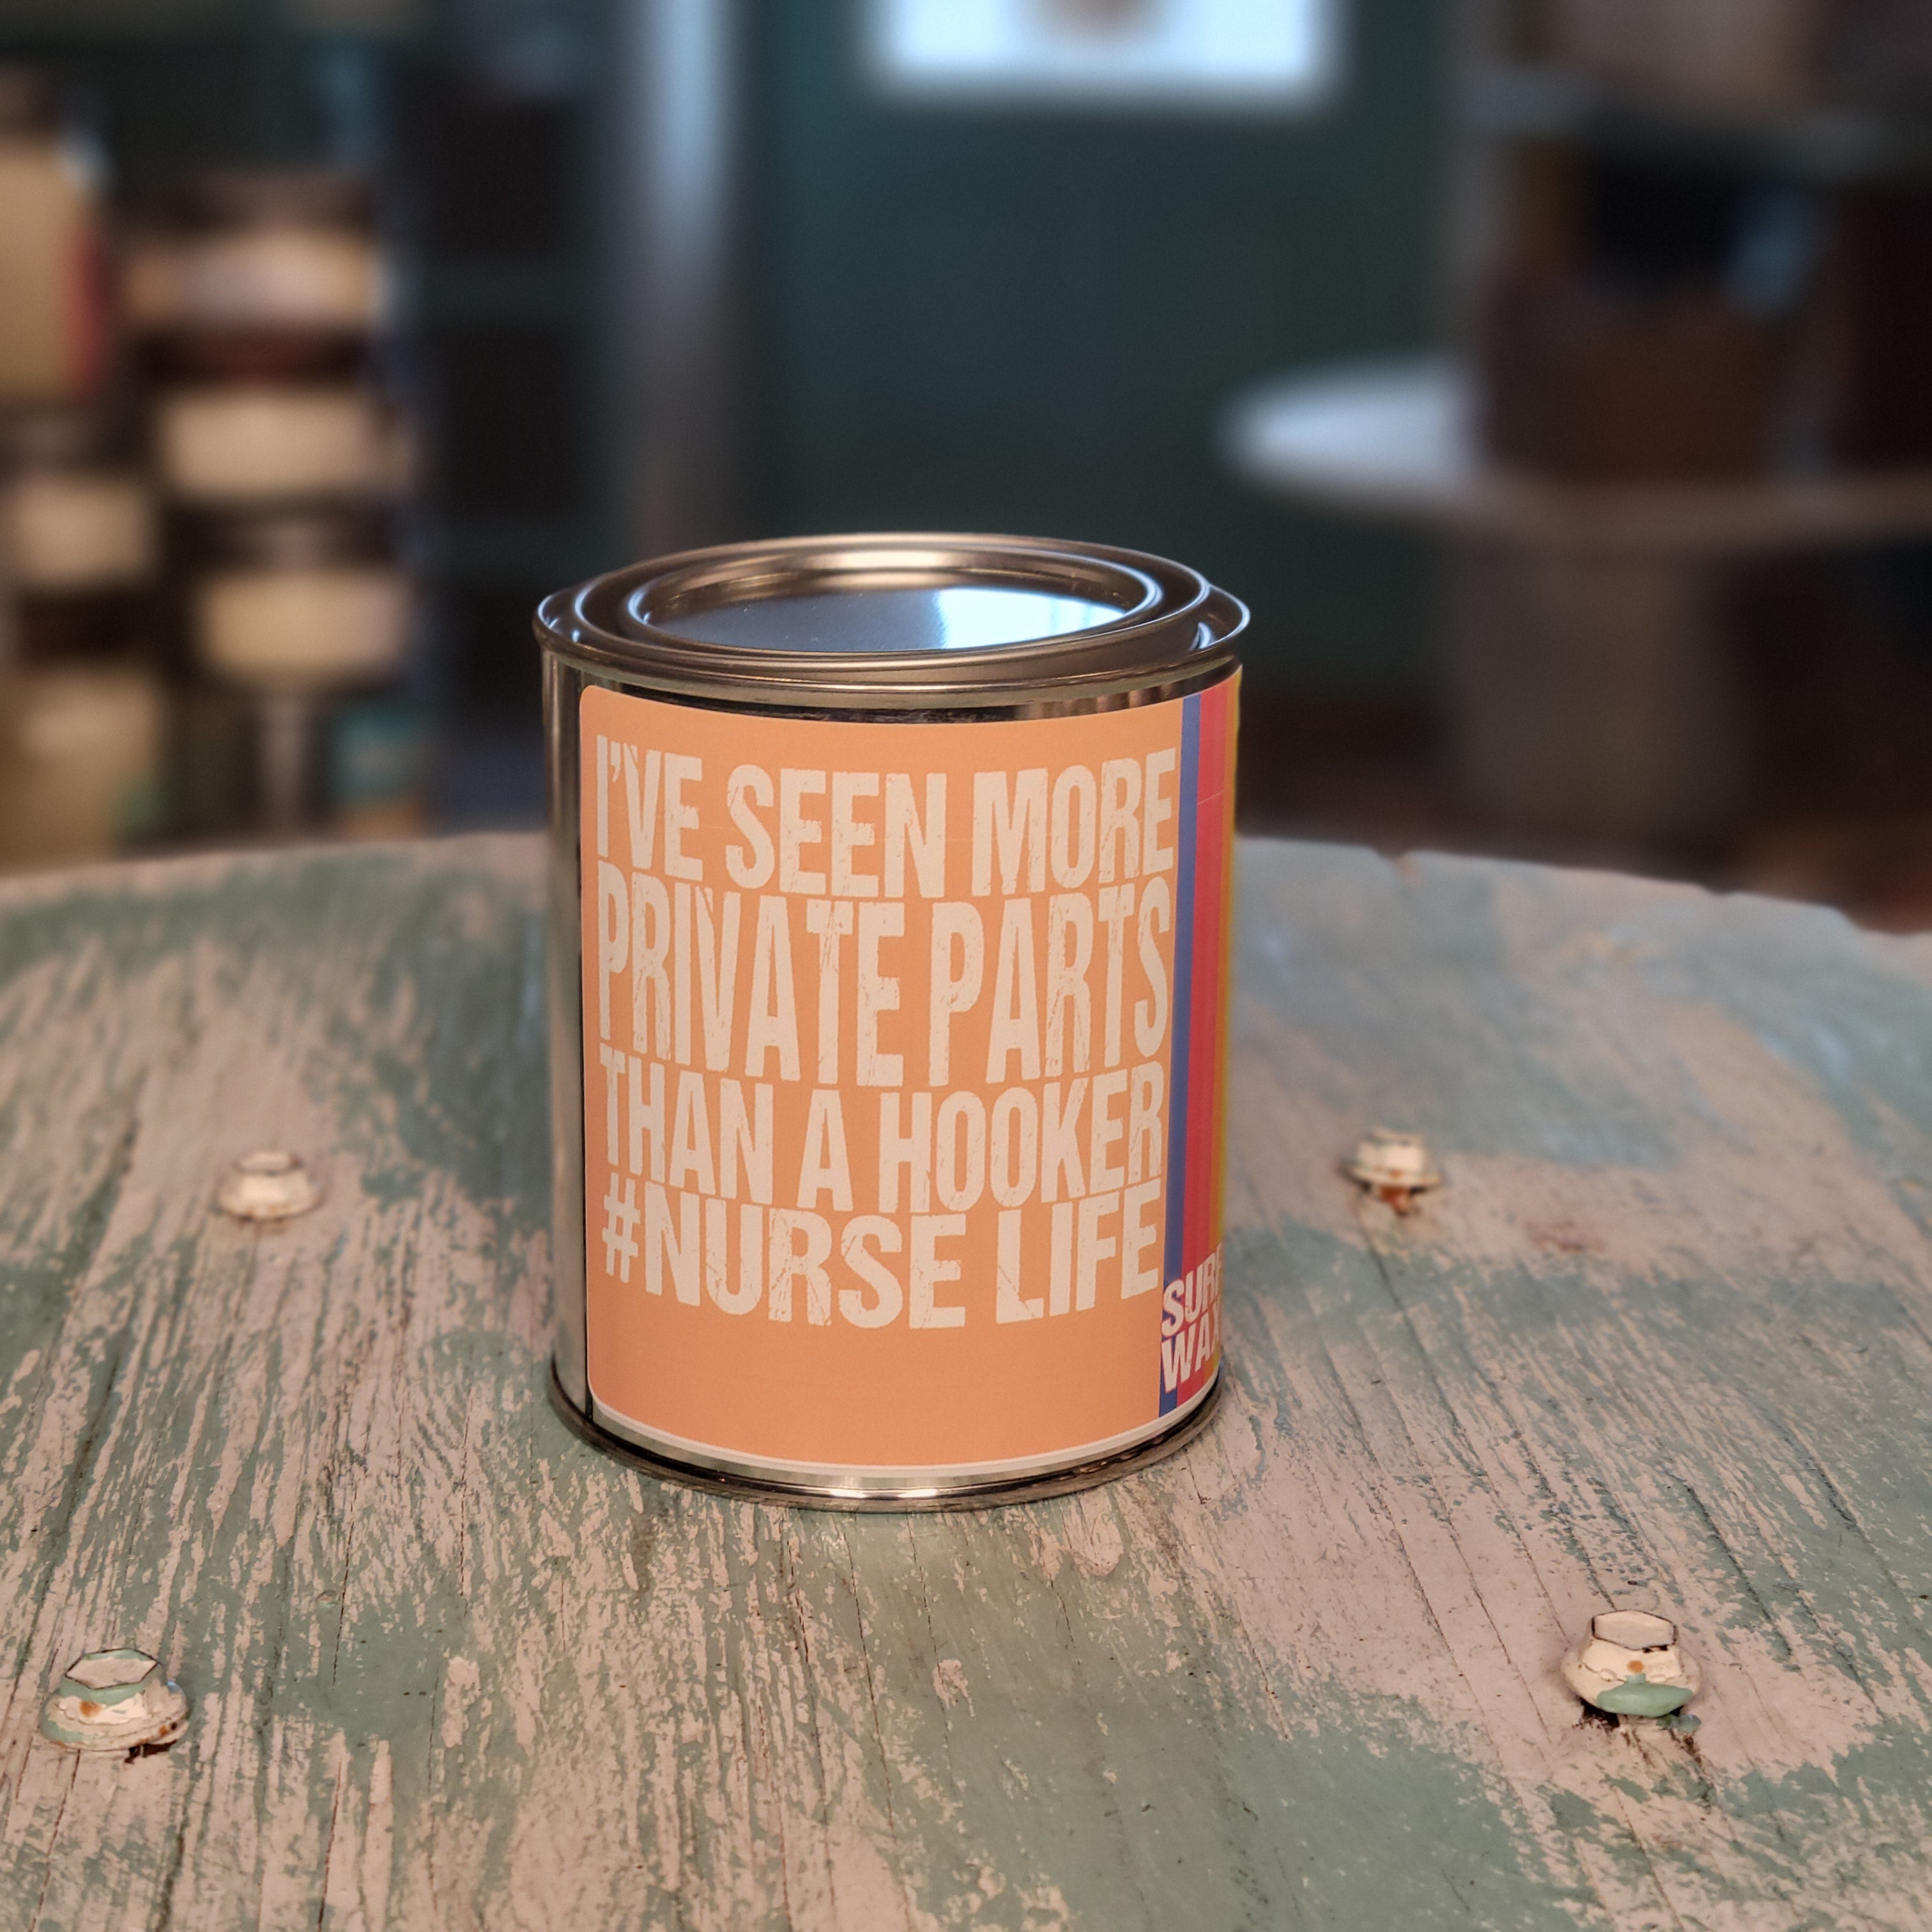 Nurse Life Surf Wax Paint Can Candle - Not Your Mother's Collection